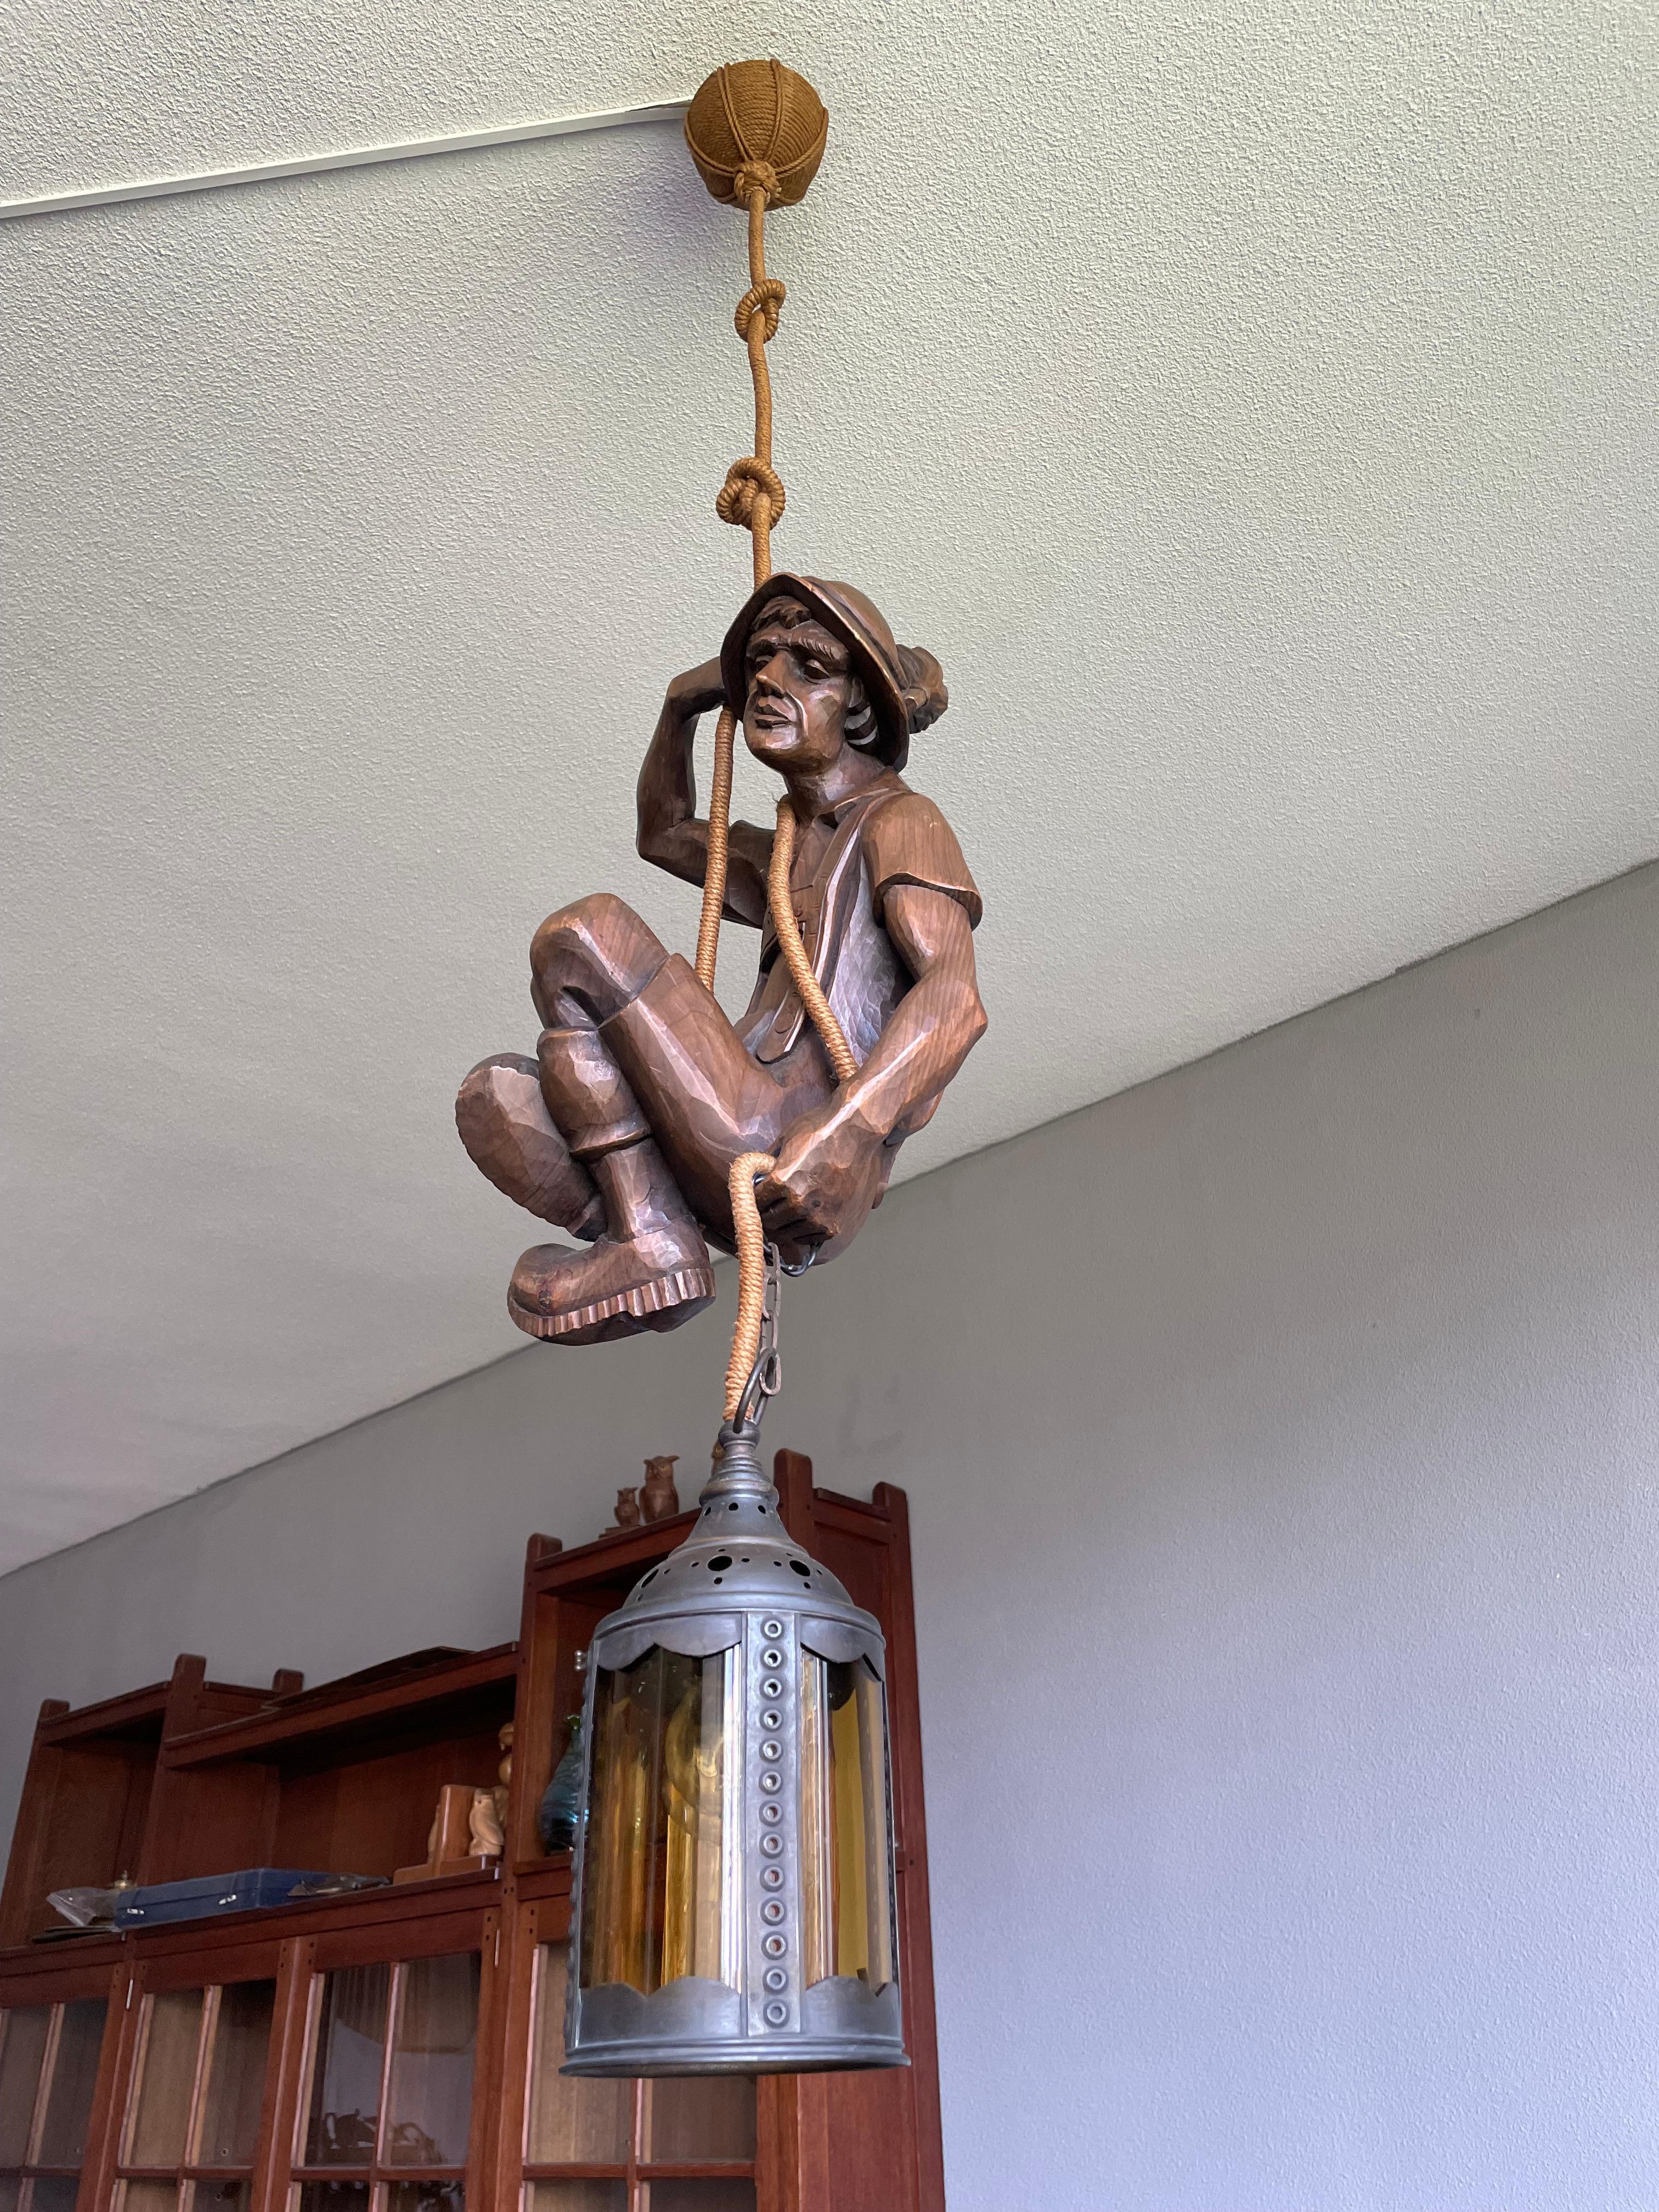 Rare and beautifully crafted light fixture for Black Forest and mountaineering enthousiasts.

This beautifully hand carved and sculptural light fixture is in superb condition. A light like this will look great at home, but it can also create the